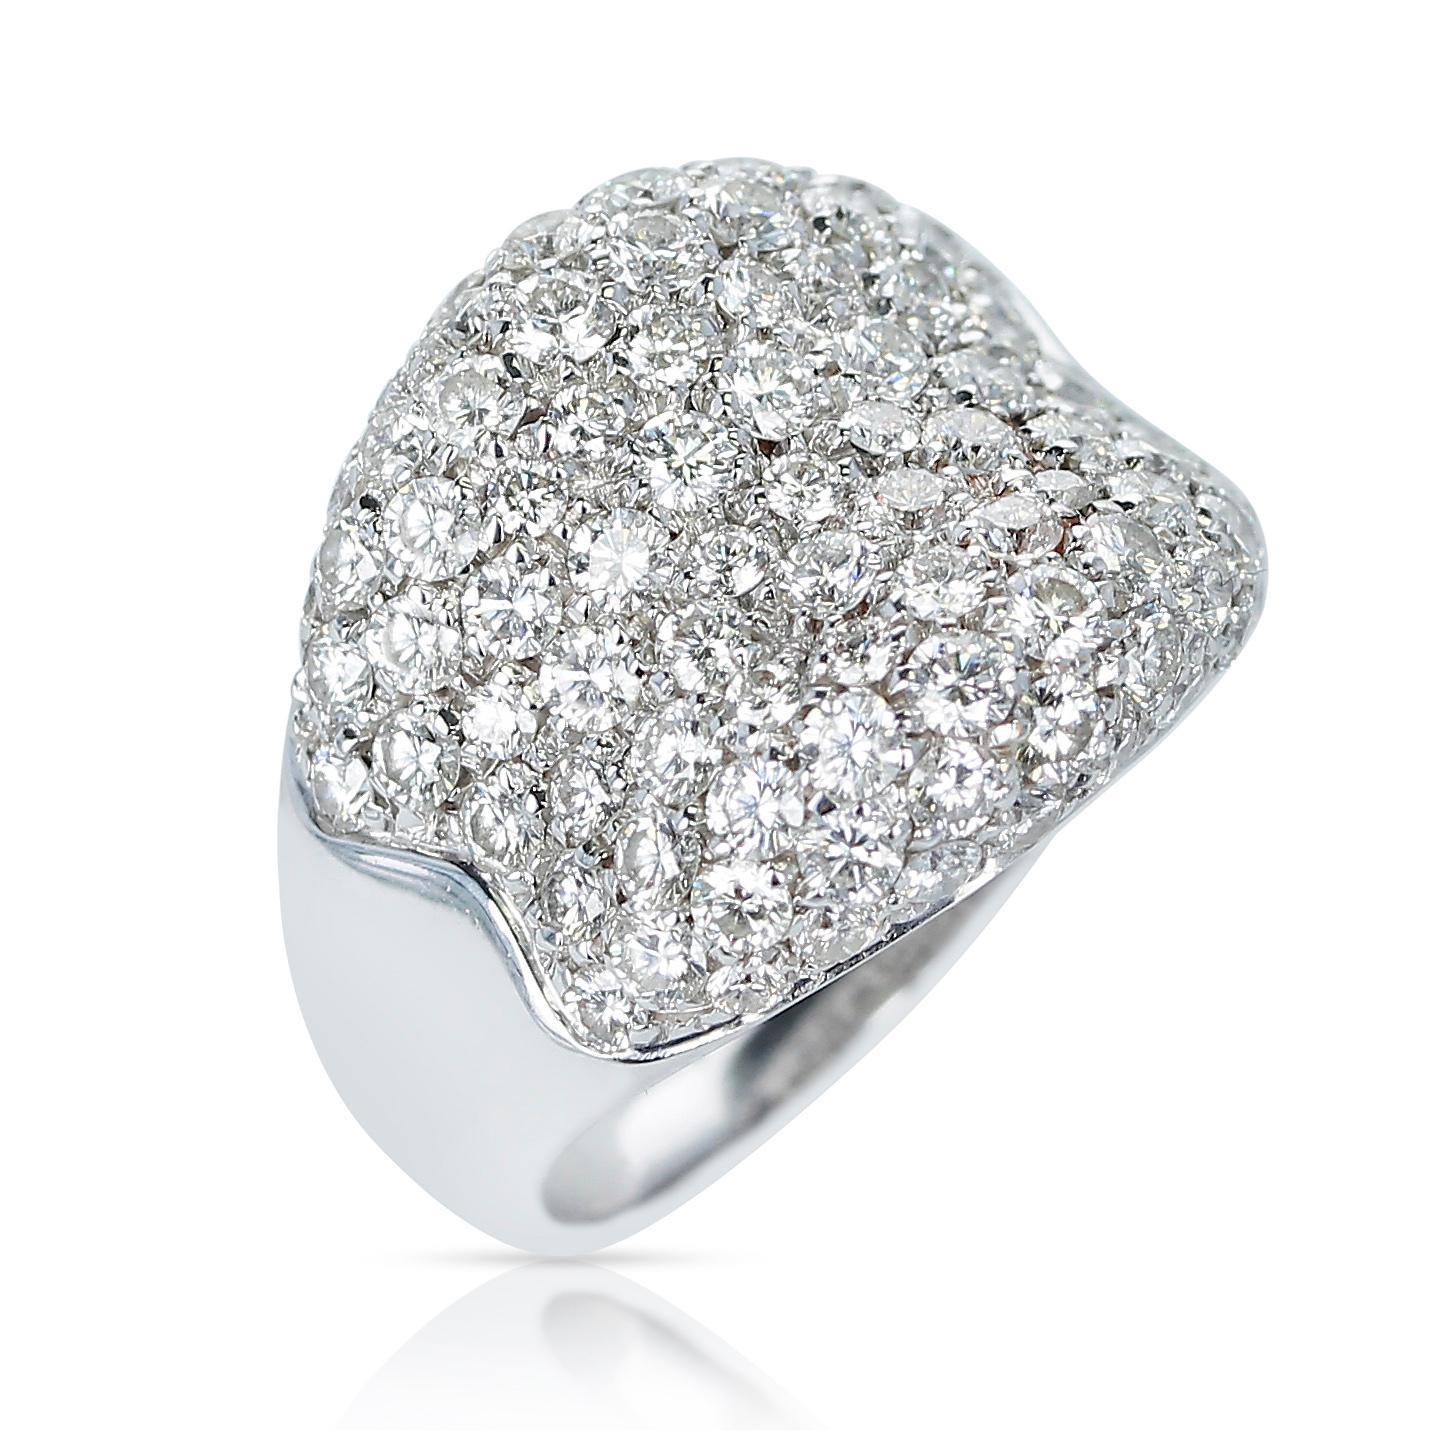 A Diamond Bombe Ring made in 18k White Gold. The diamonds weigh 2.50 carats. Ring Size US 7.50. Total Weight: 10.04 grams. 
 